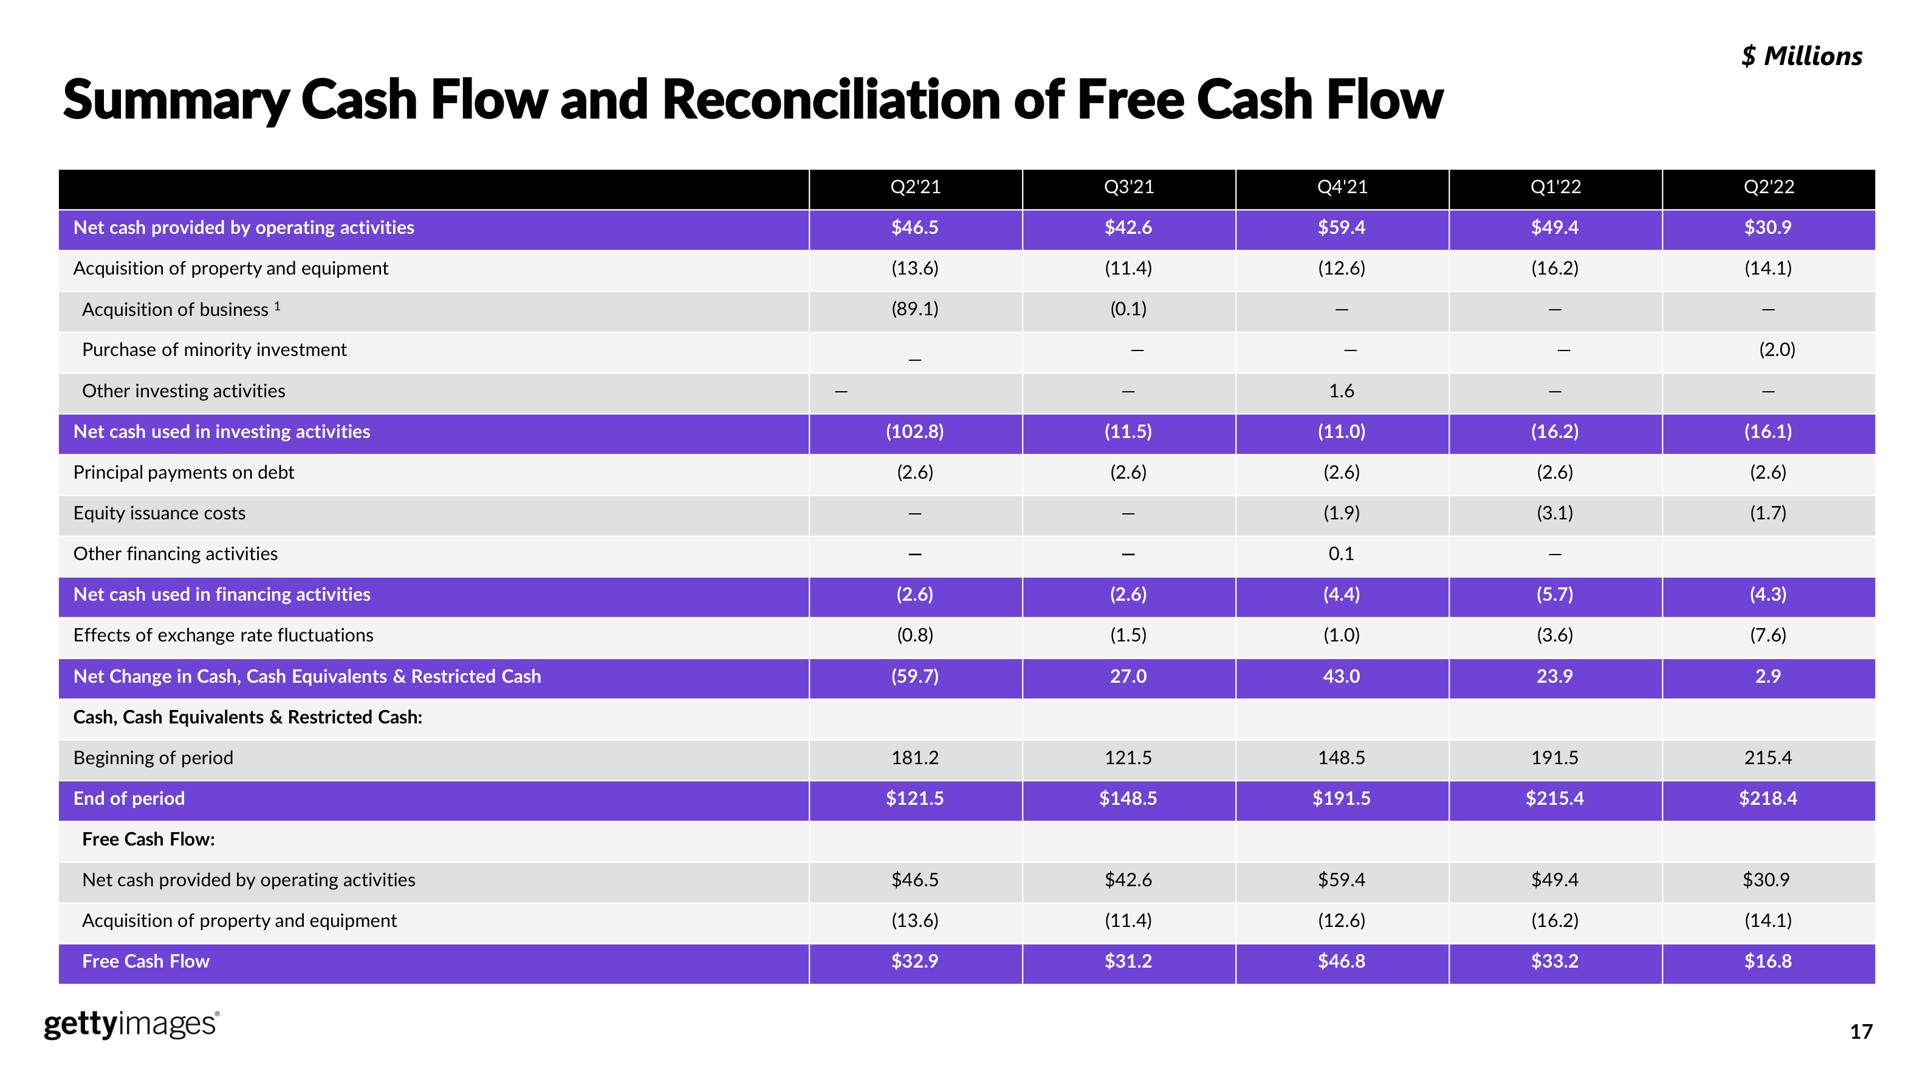 summary cash flow and reconciliation of free cash flow cor wer | Getty